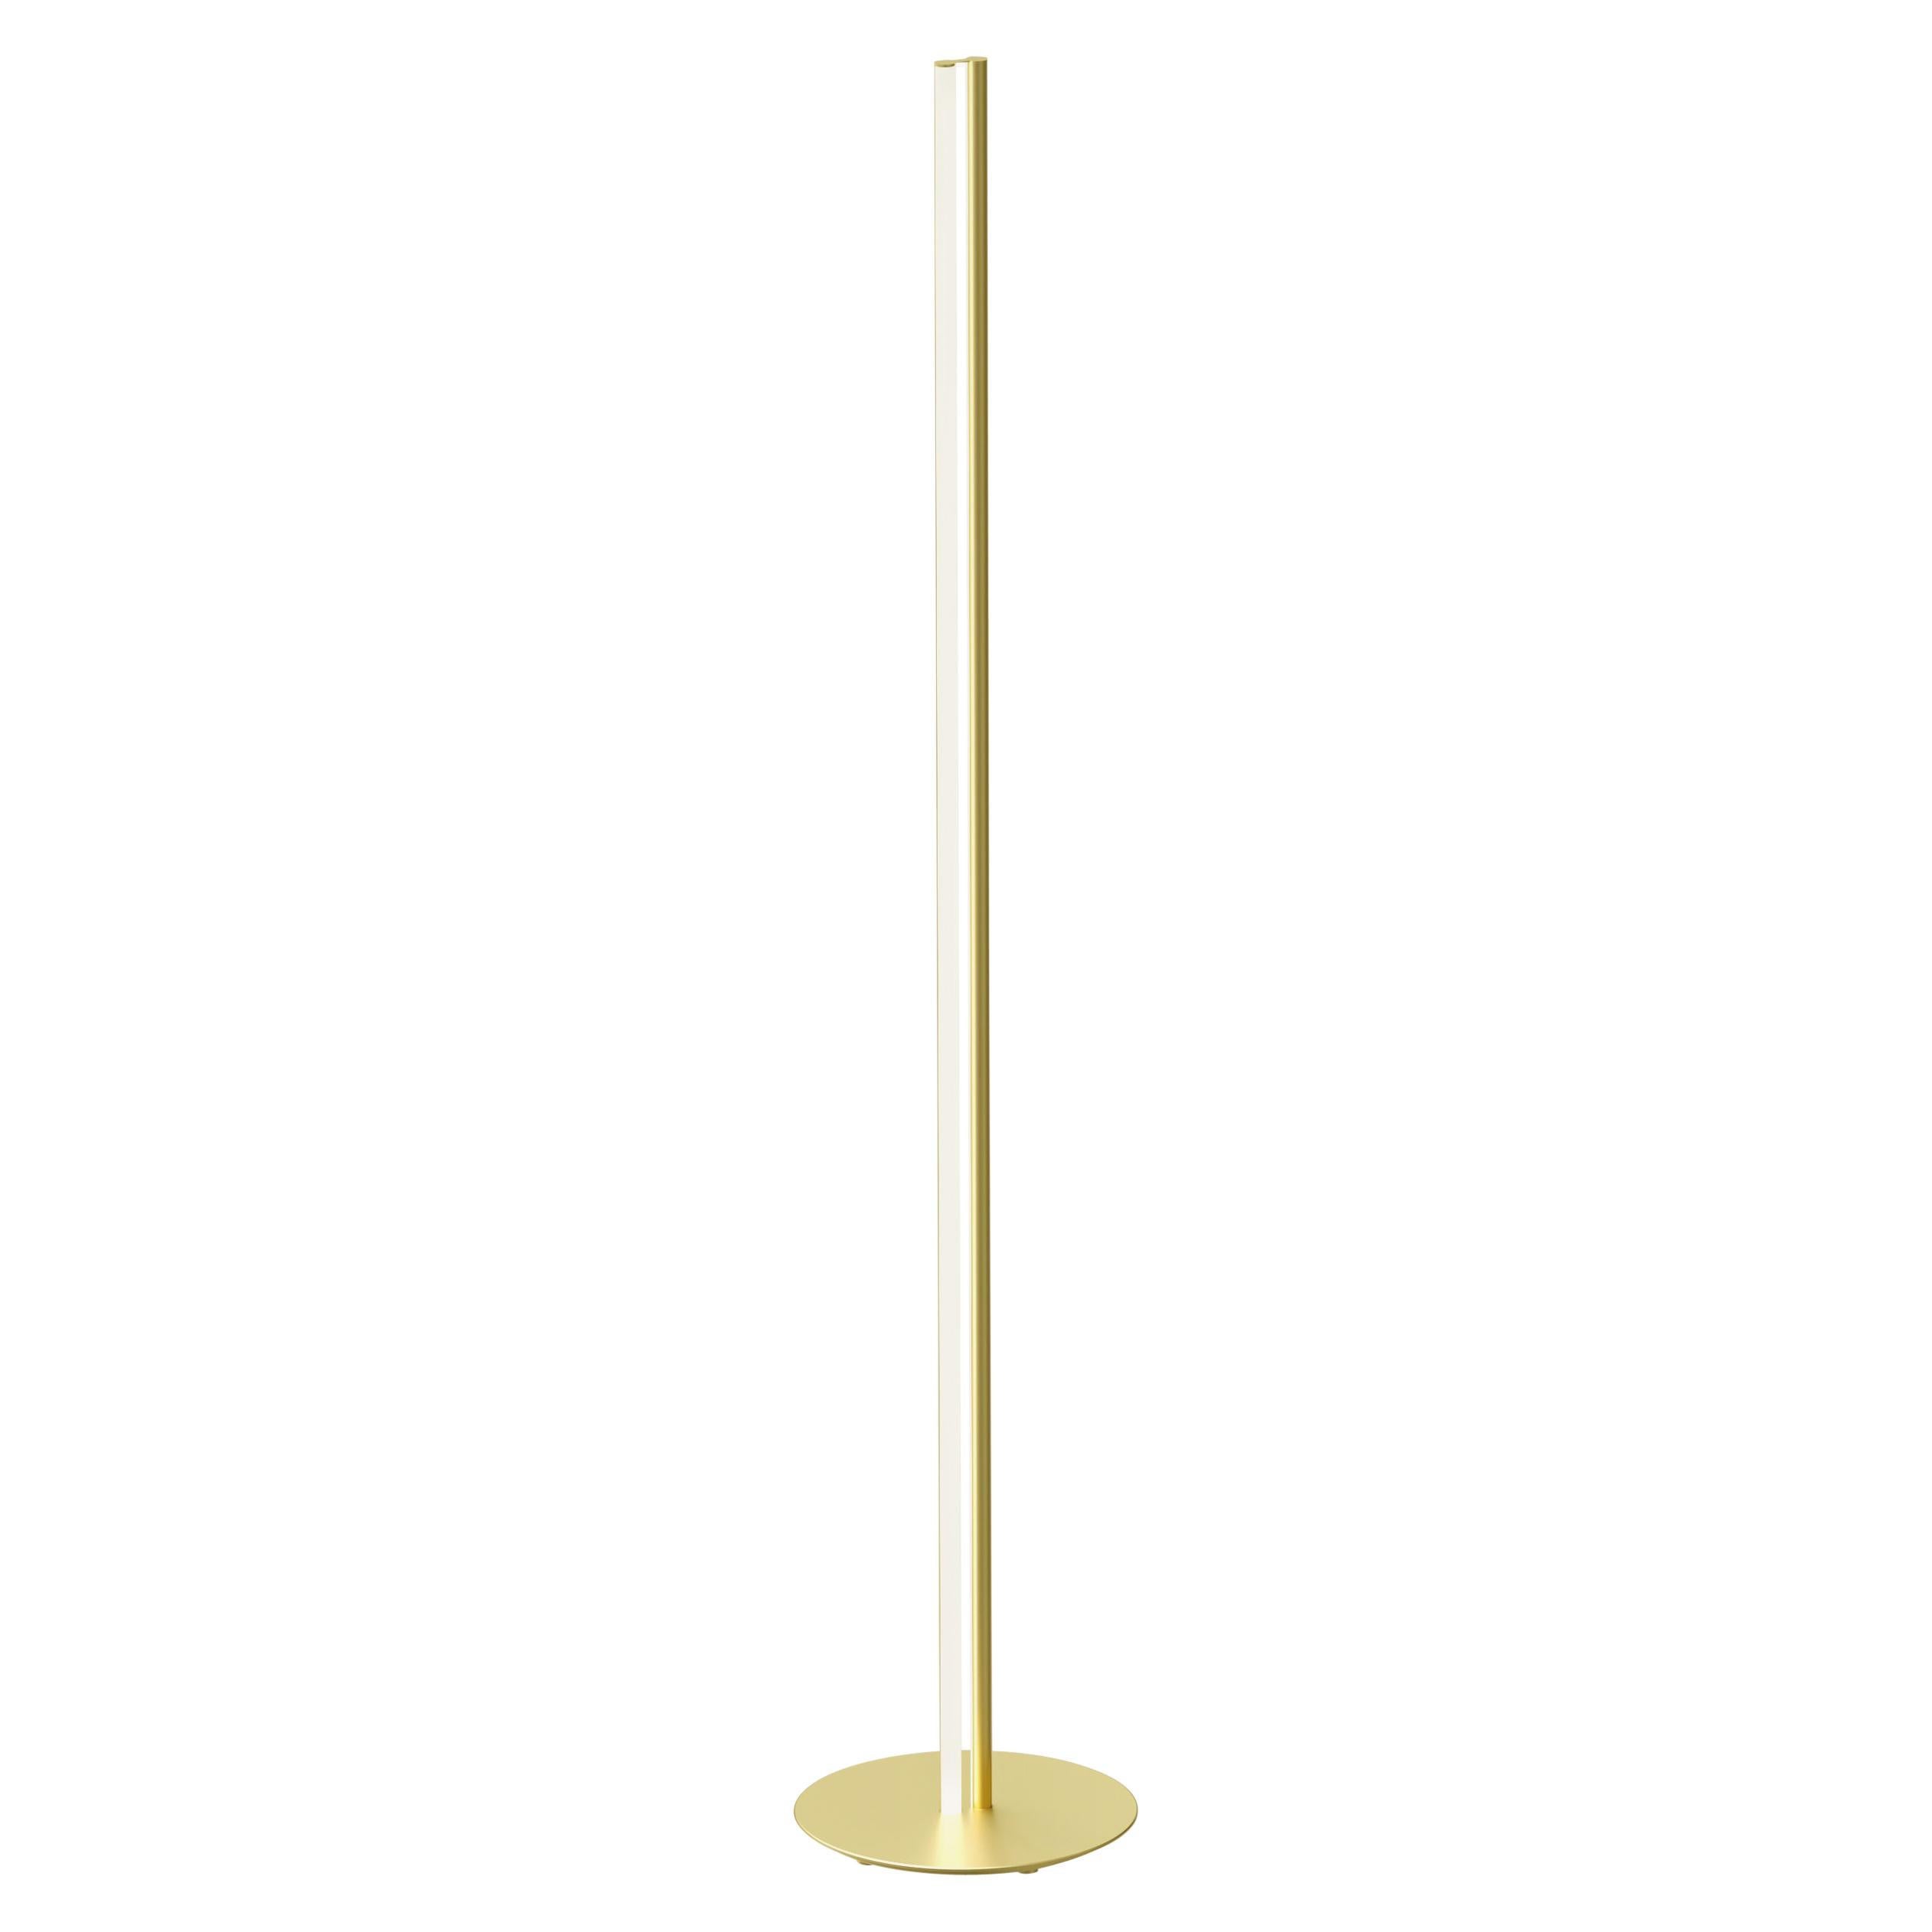 Flos Coordinates Floor Lamp in Anodized Champagne by Michael Anastassiades